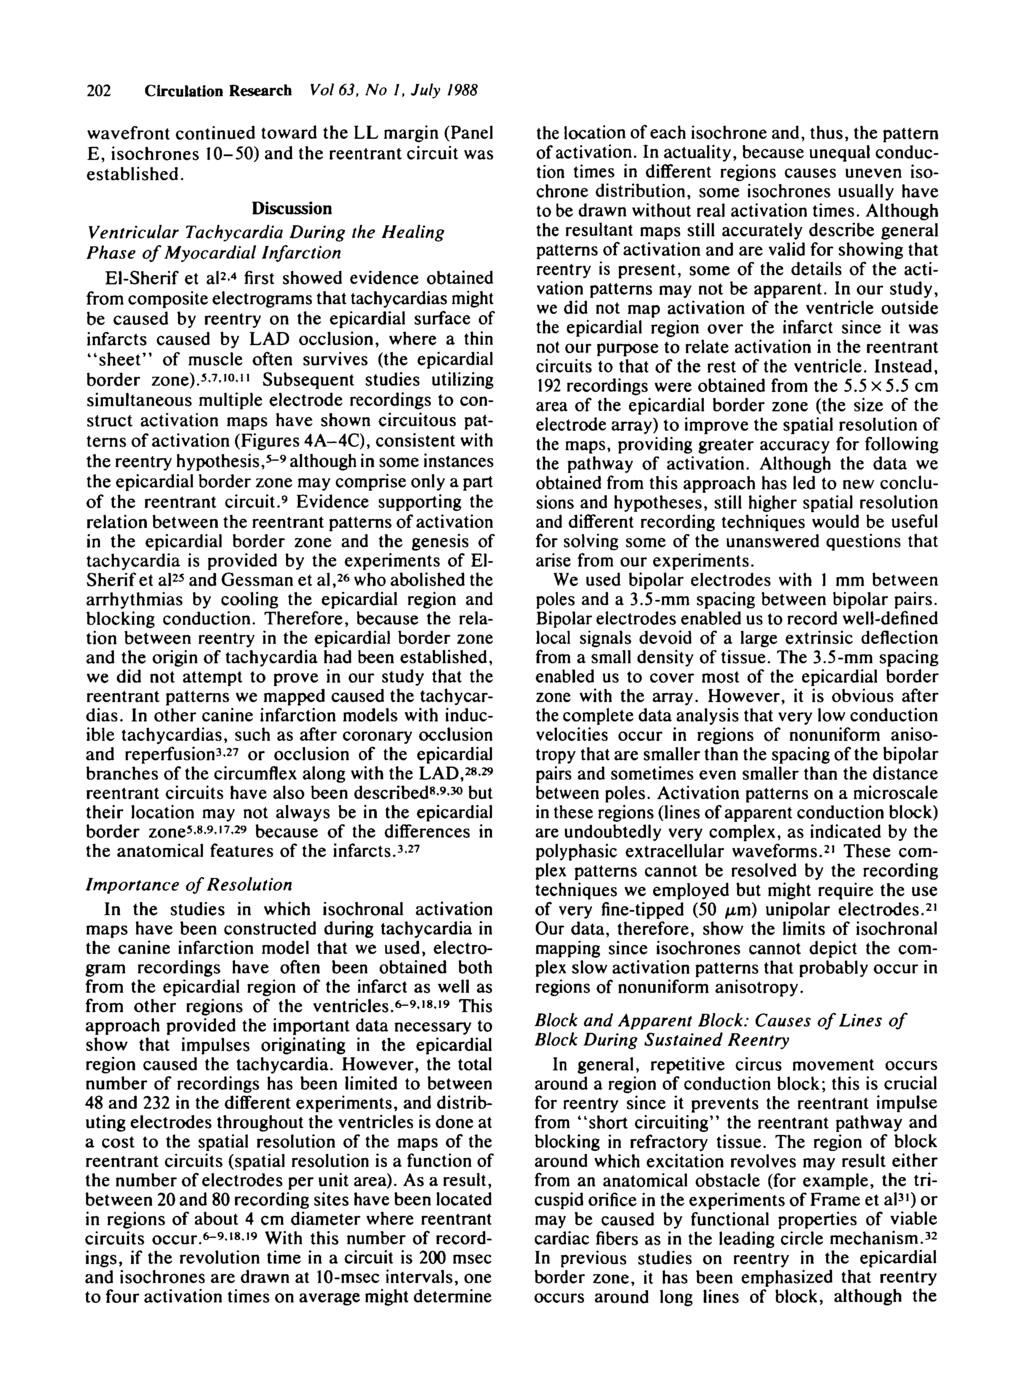 202 Circulation Research Vol 63, No 1, July 1988 wavefront continued toward the LL margin (Panel E, isochrones 10-50) and the reentrant circuit was established.